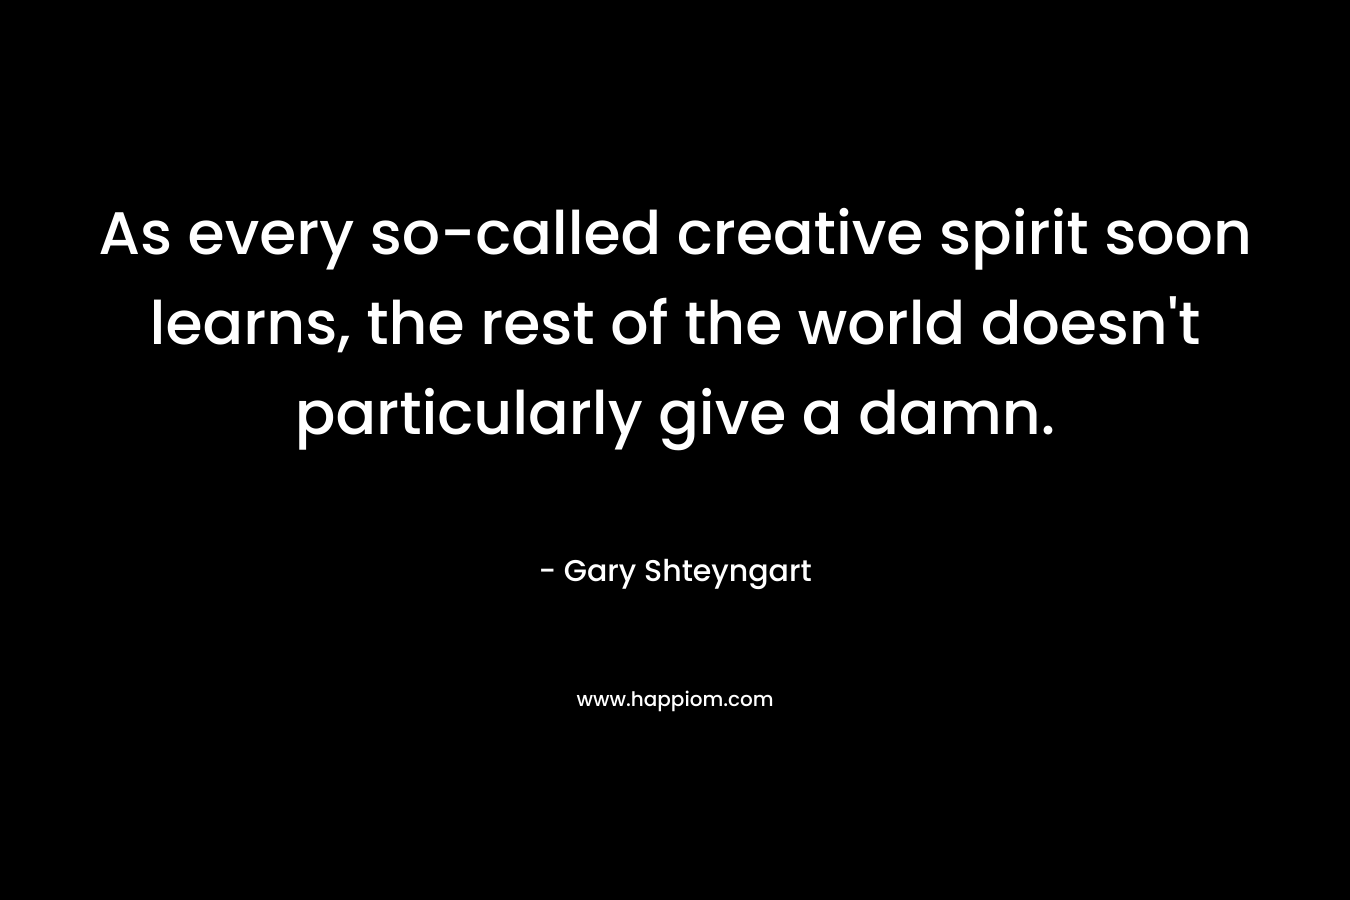 As every so-called creative spirit soon learns, the rest of the world doesn't particularly give a damn.